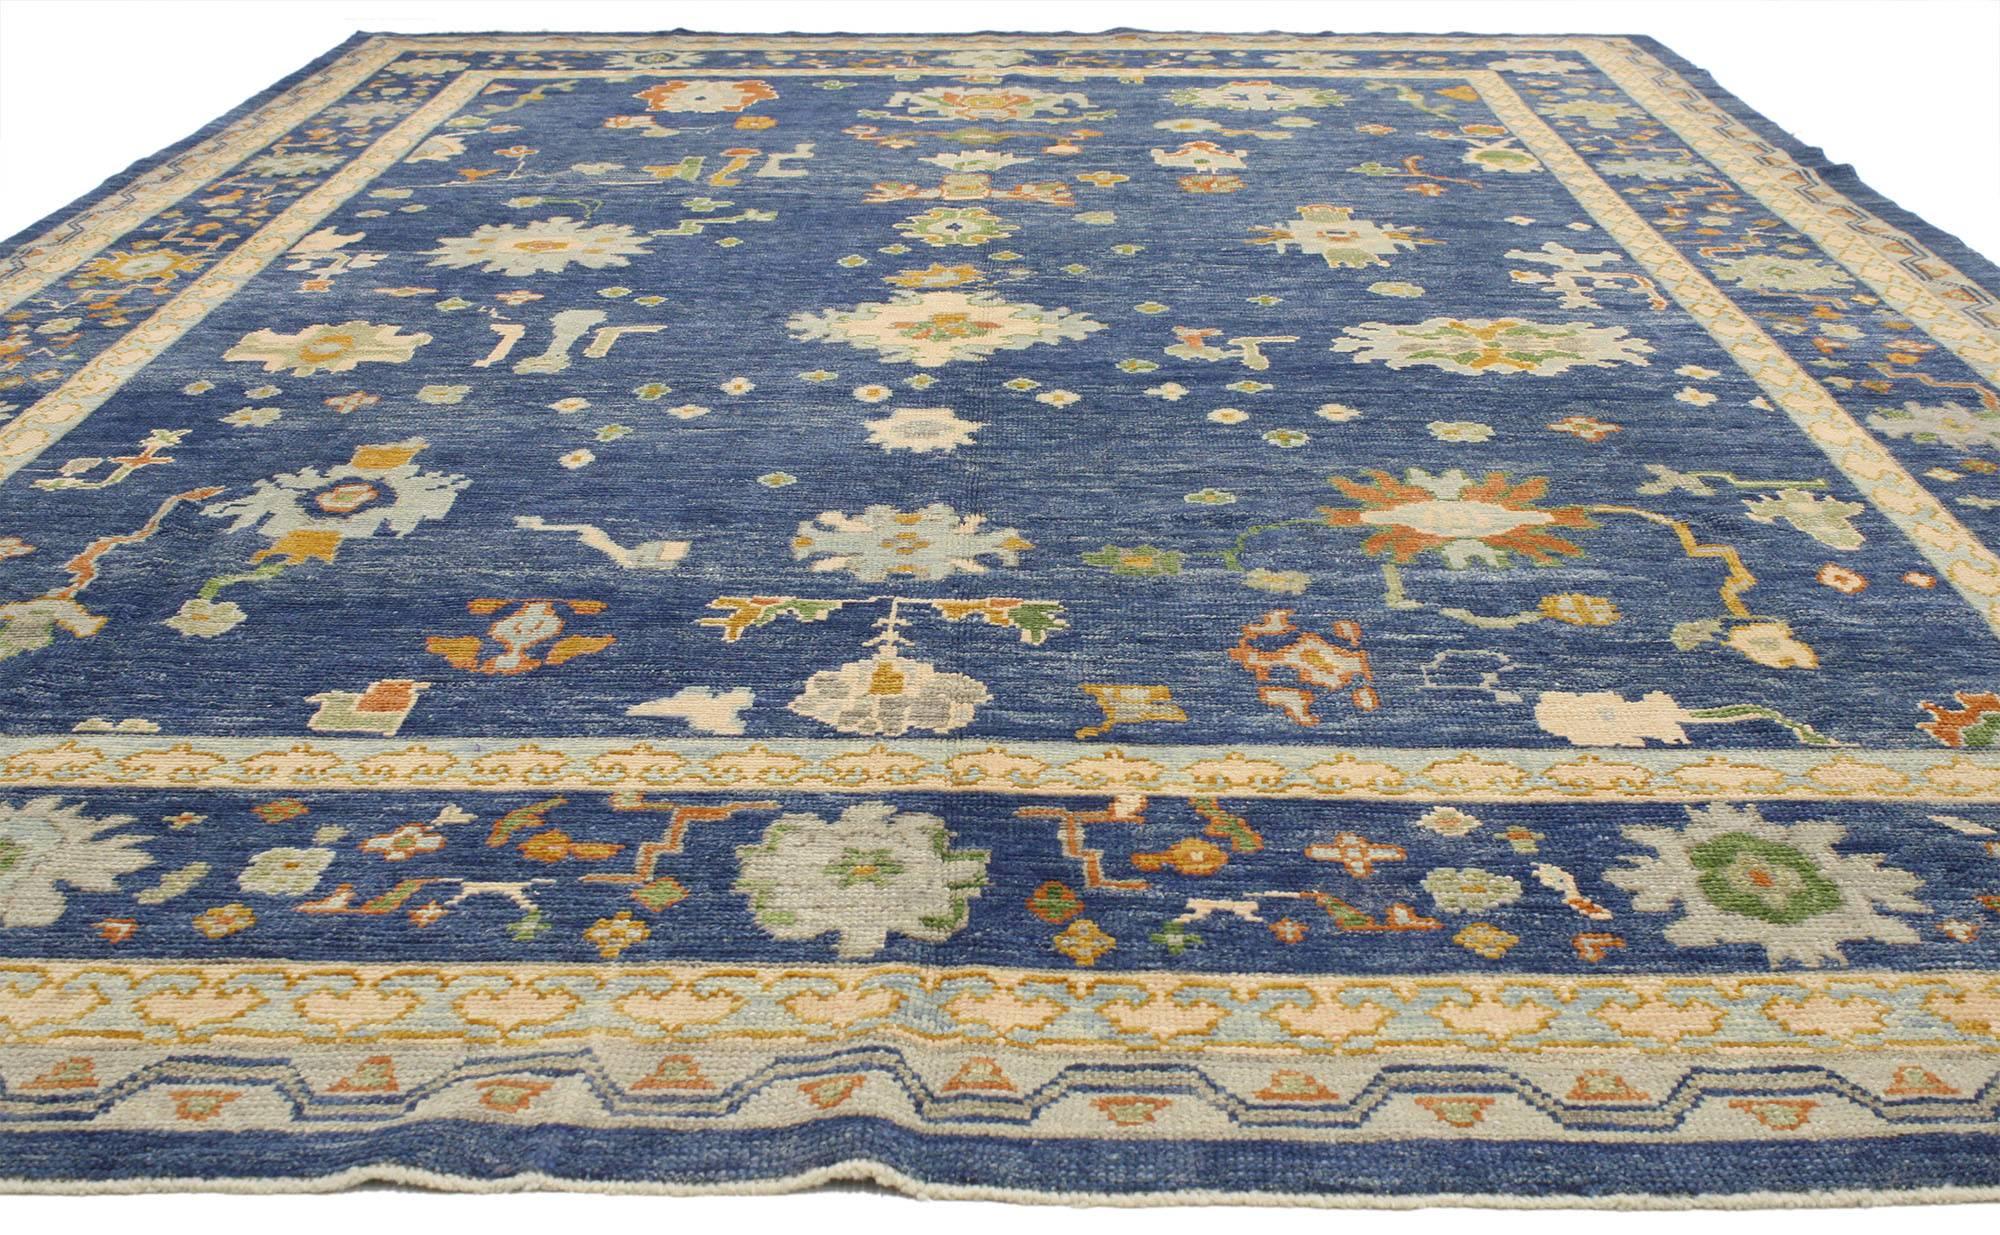 52243 contemporary Turkish Oushak rug with modern style. This unique Contemporary Turkish Oushak rug features a classic design in a modern style, geometric floral symbols and boteh are scattered over a deep sea of blue sapphire. Geometric flowers